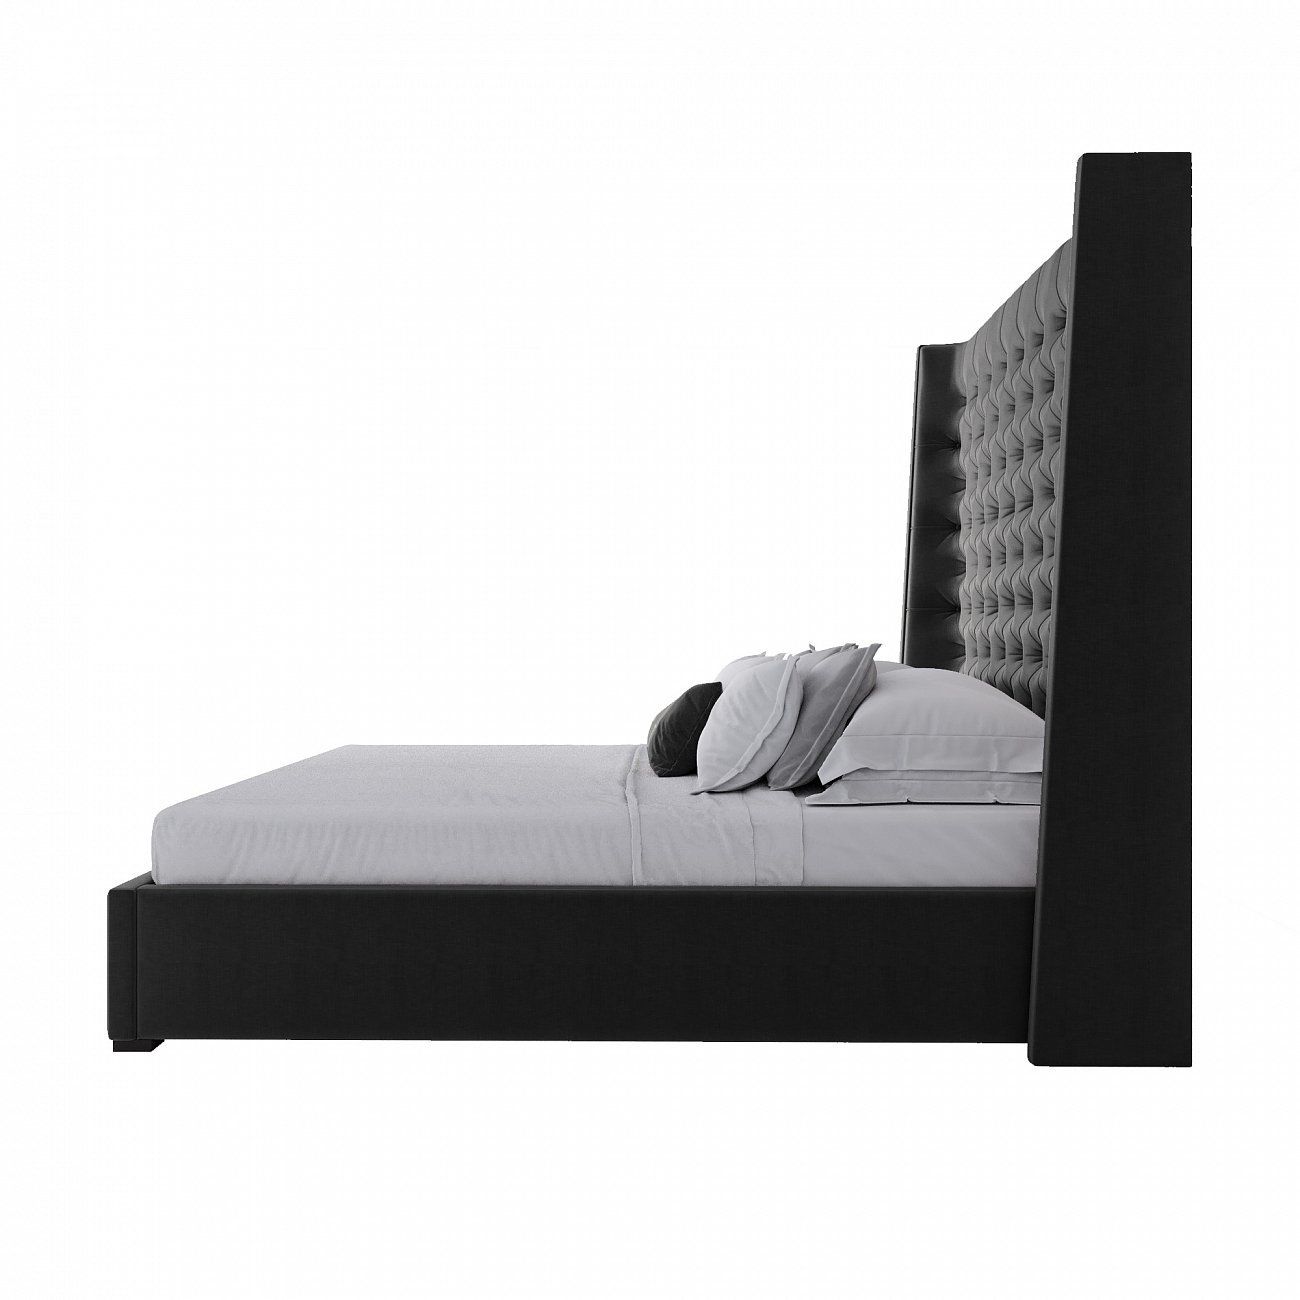 Double bed with upholstered headboard 180x200 cm black Jackie King